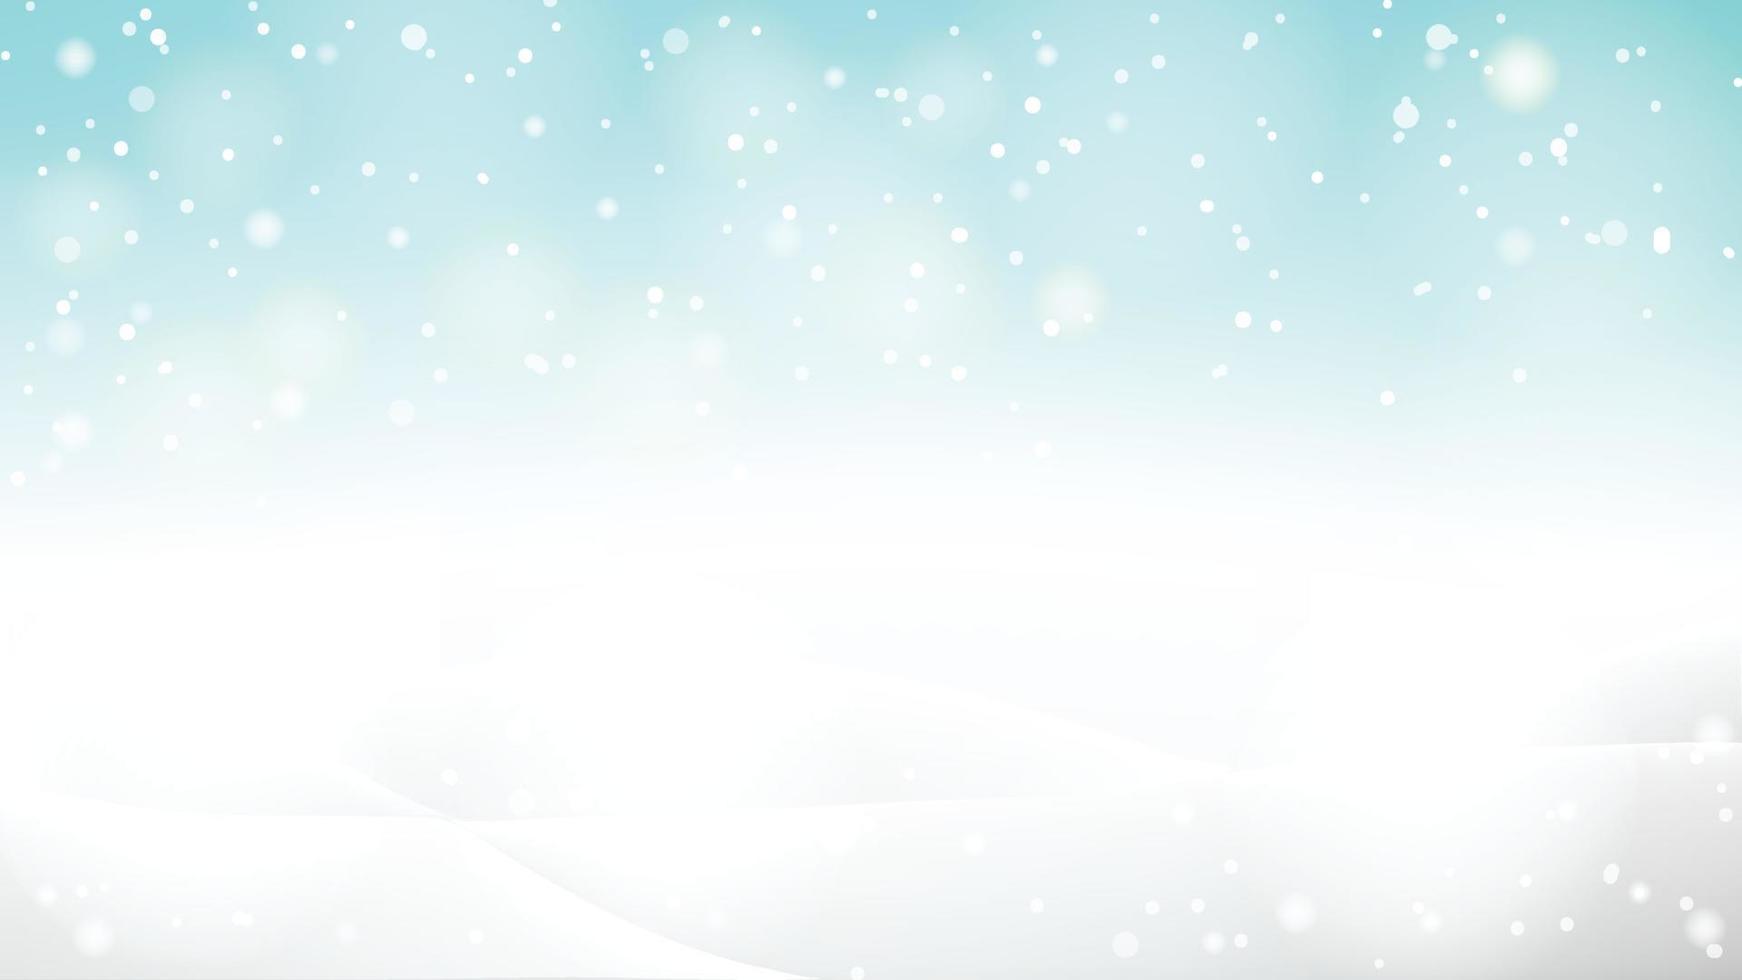 beautiful abstract snowy bokeh background for winter or christmas eps10 vectors illustration